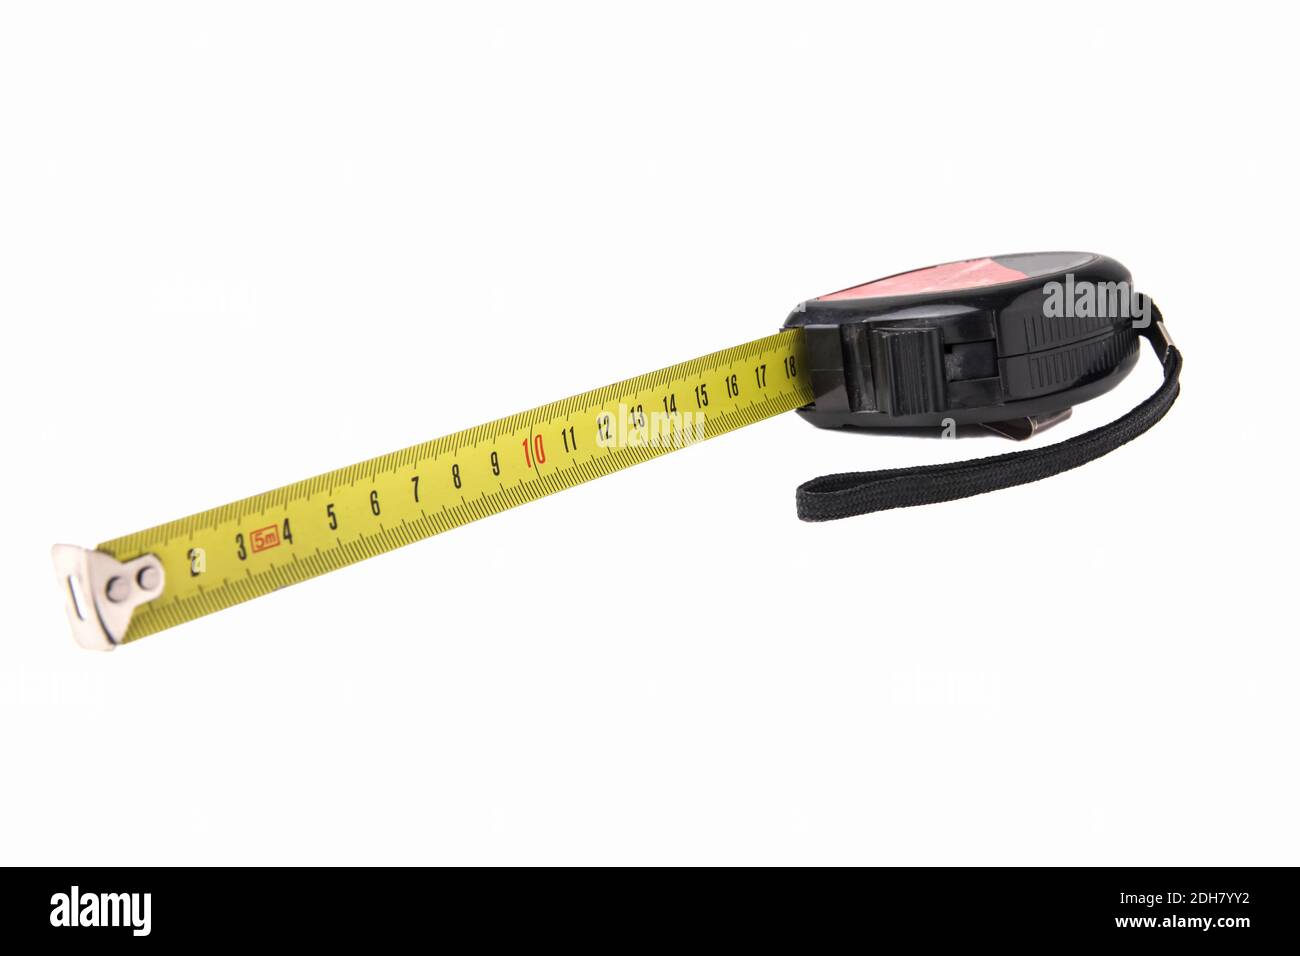 Construction tape measure in black, lying on its side with an open tape. Isolated on a white background Stock Photo